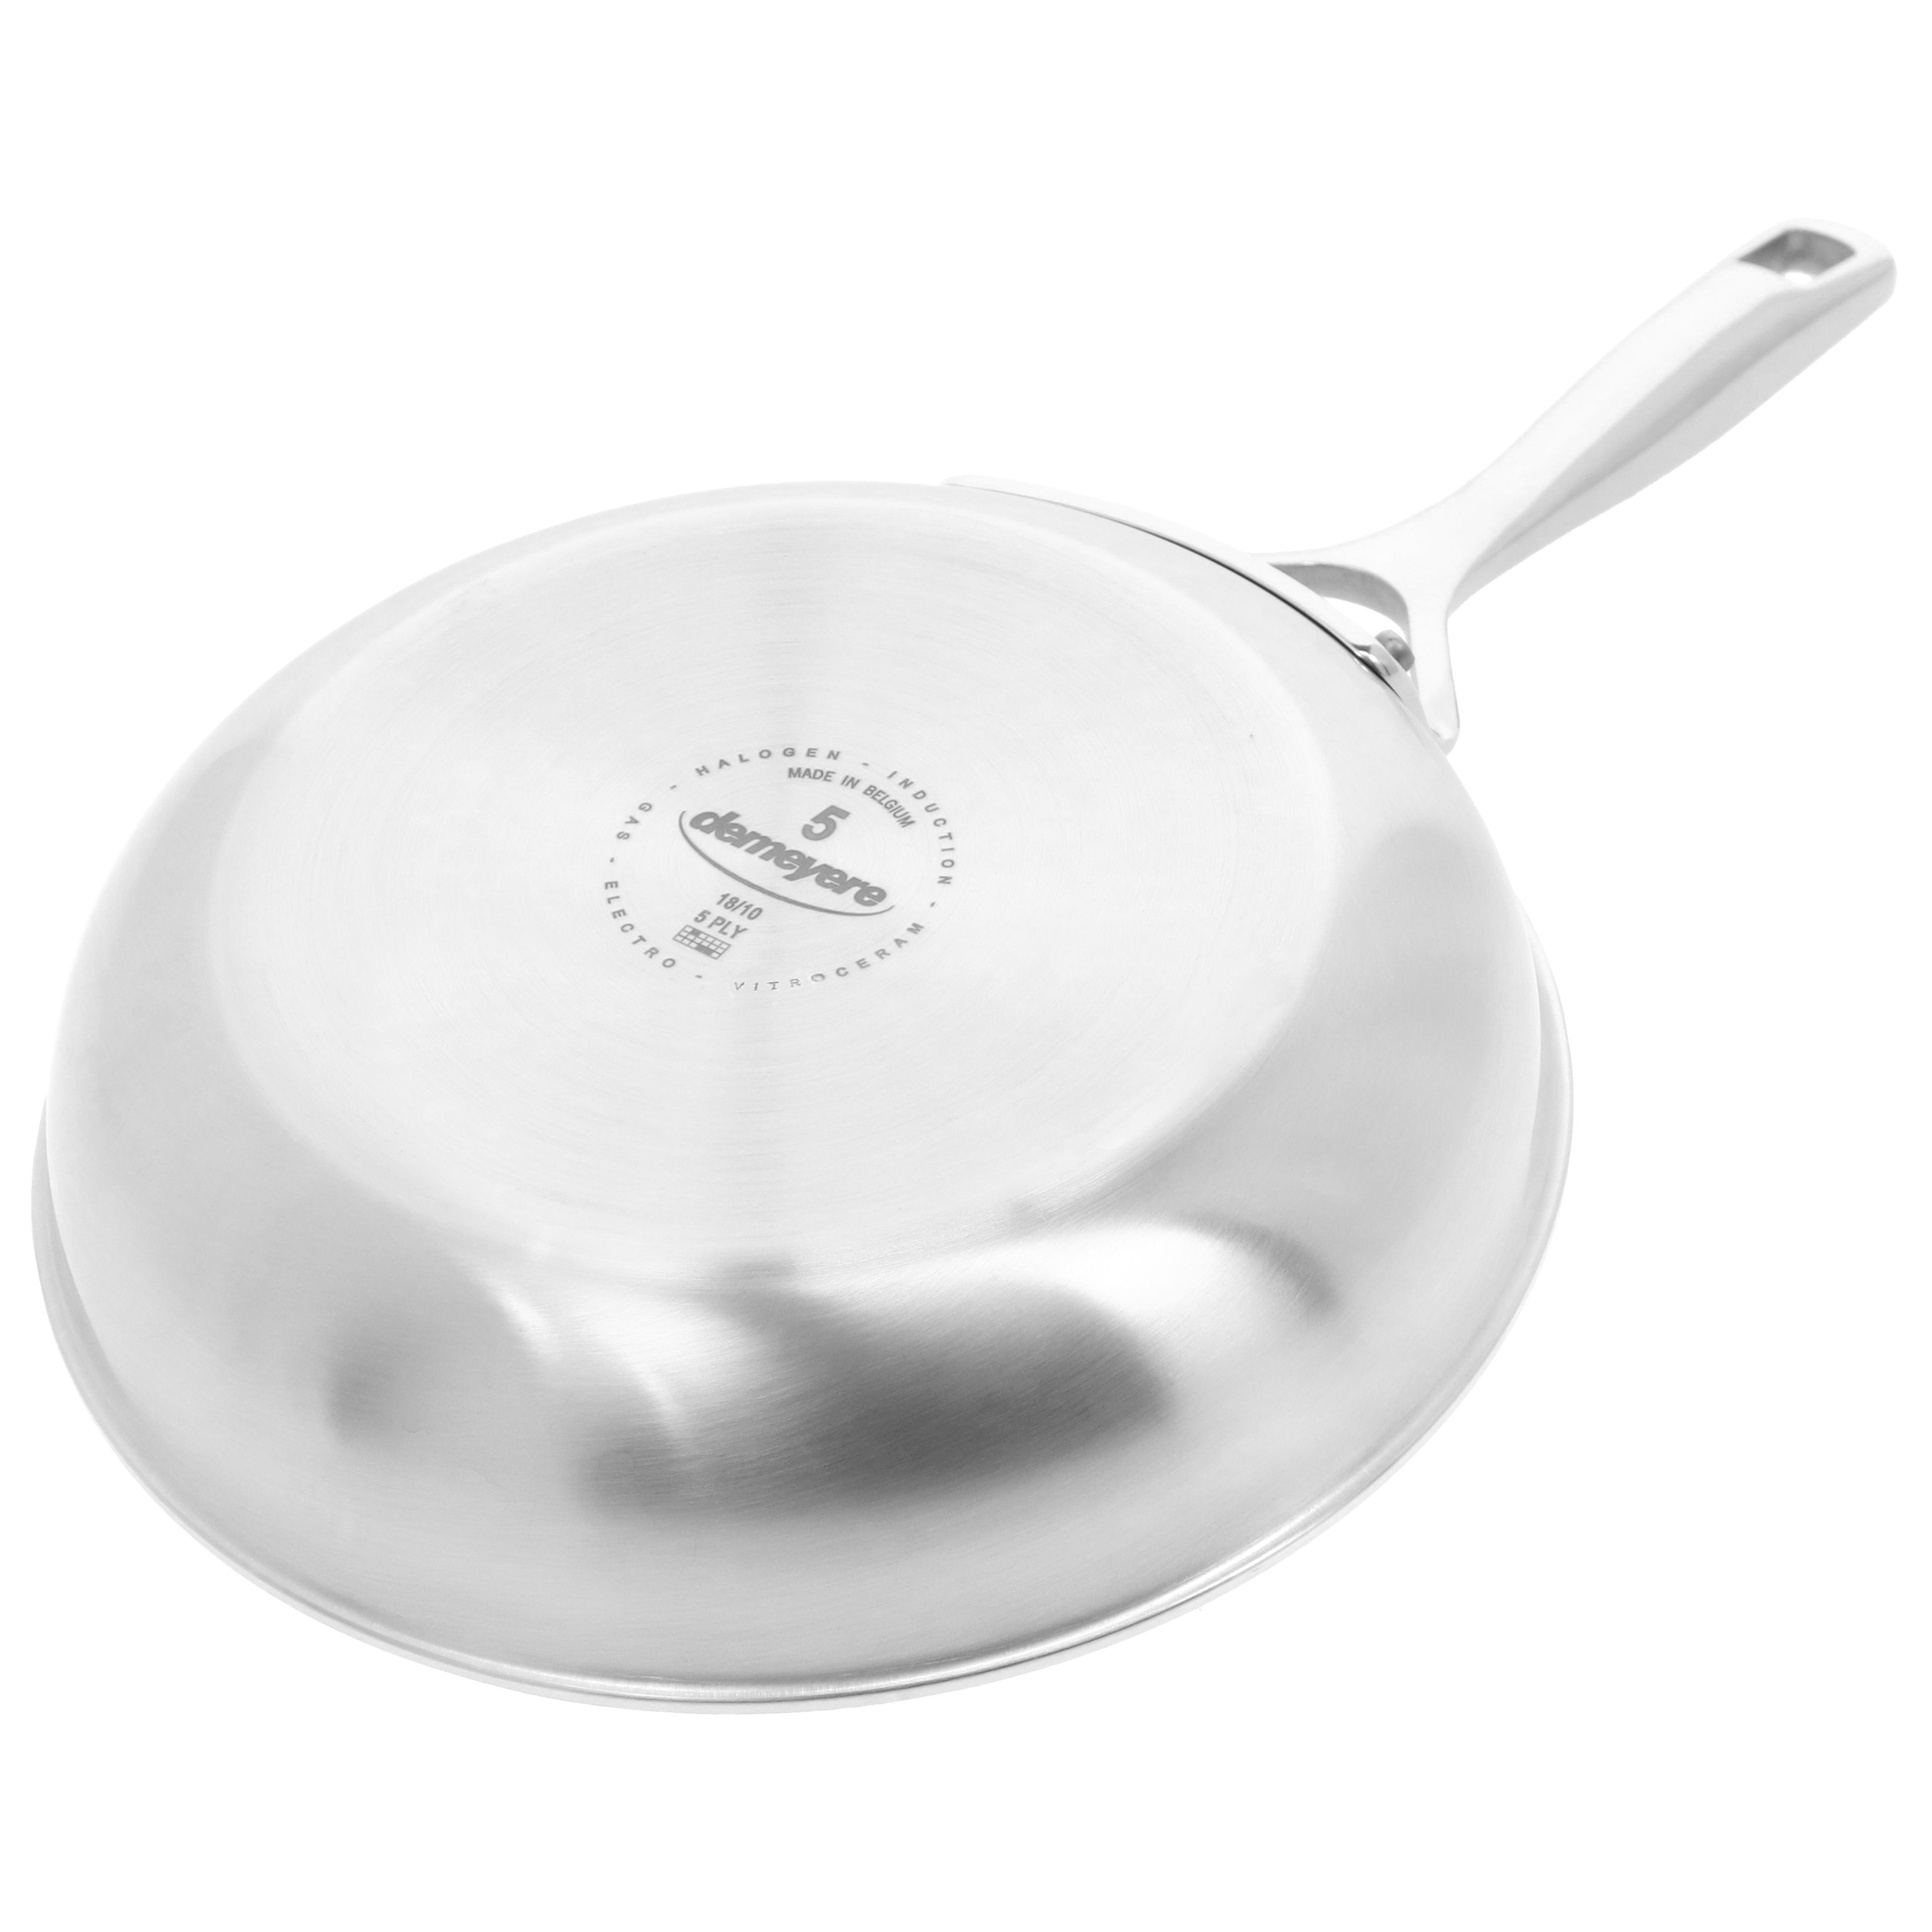 Zwilling Aurora Frying Pan Set - 5-ply Stainless Steel Skillets